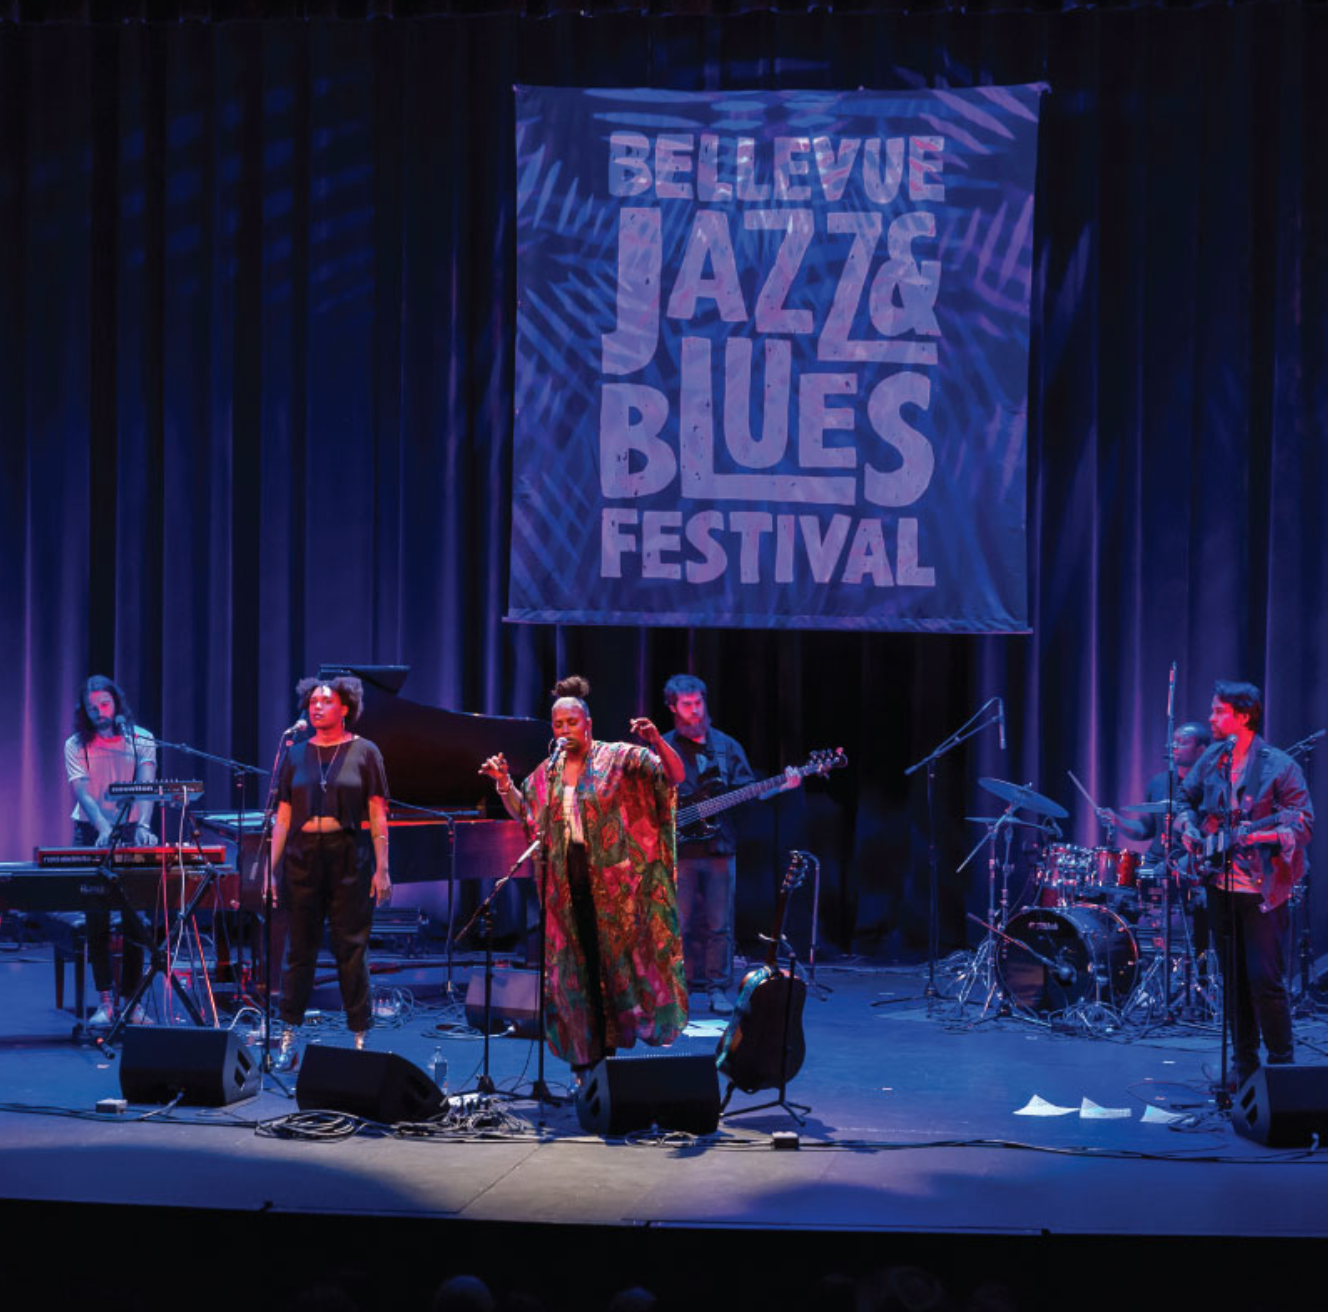 Bellevue Jazz and Blues Festival